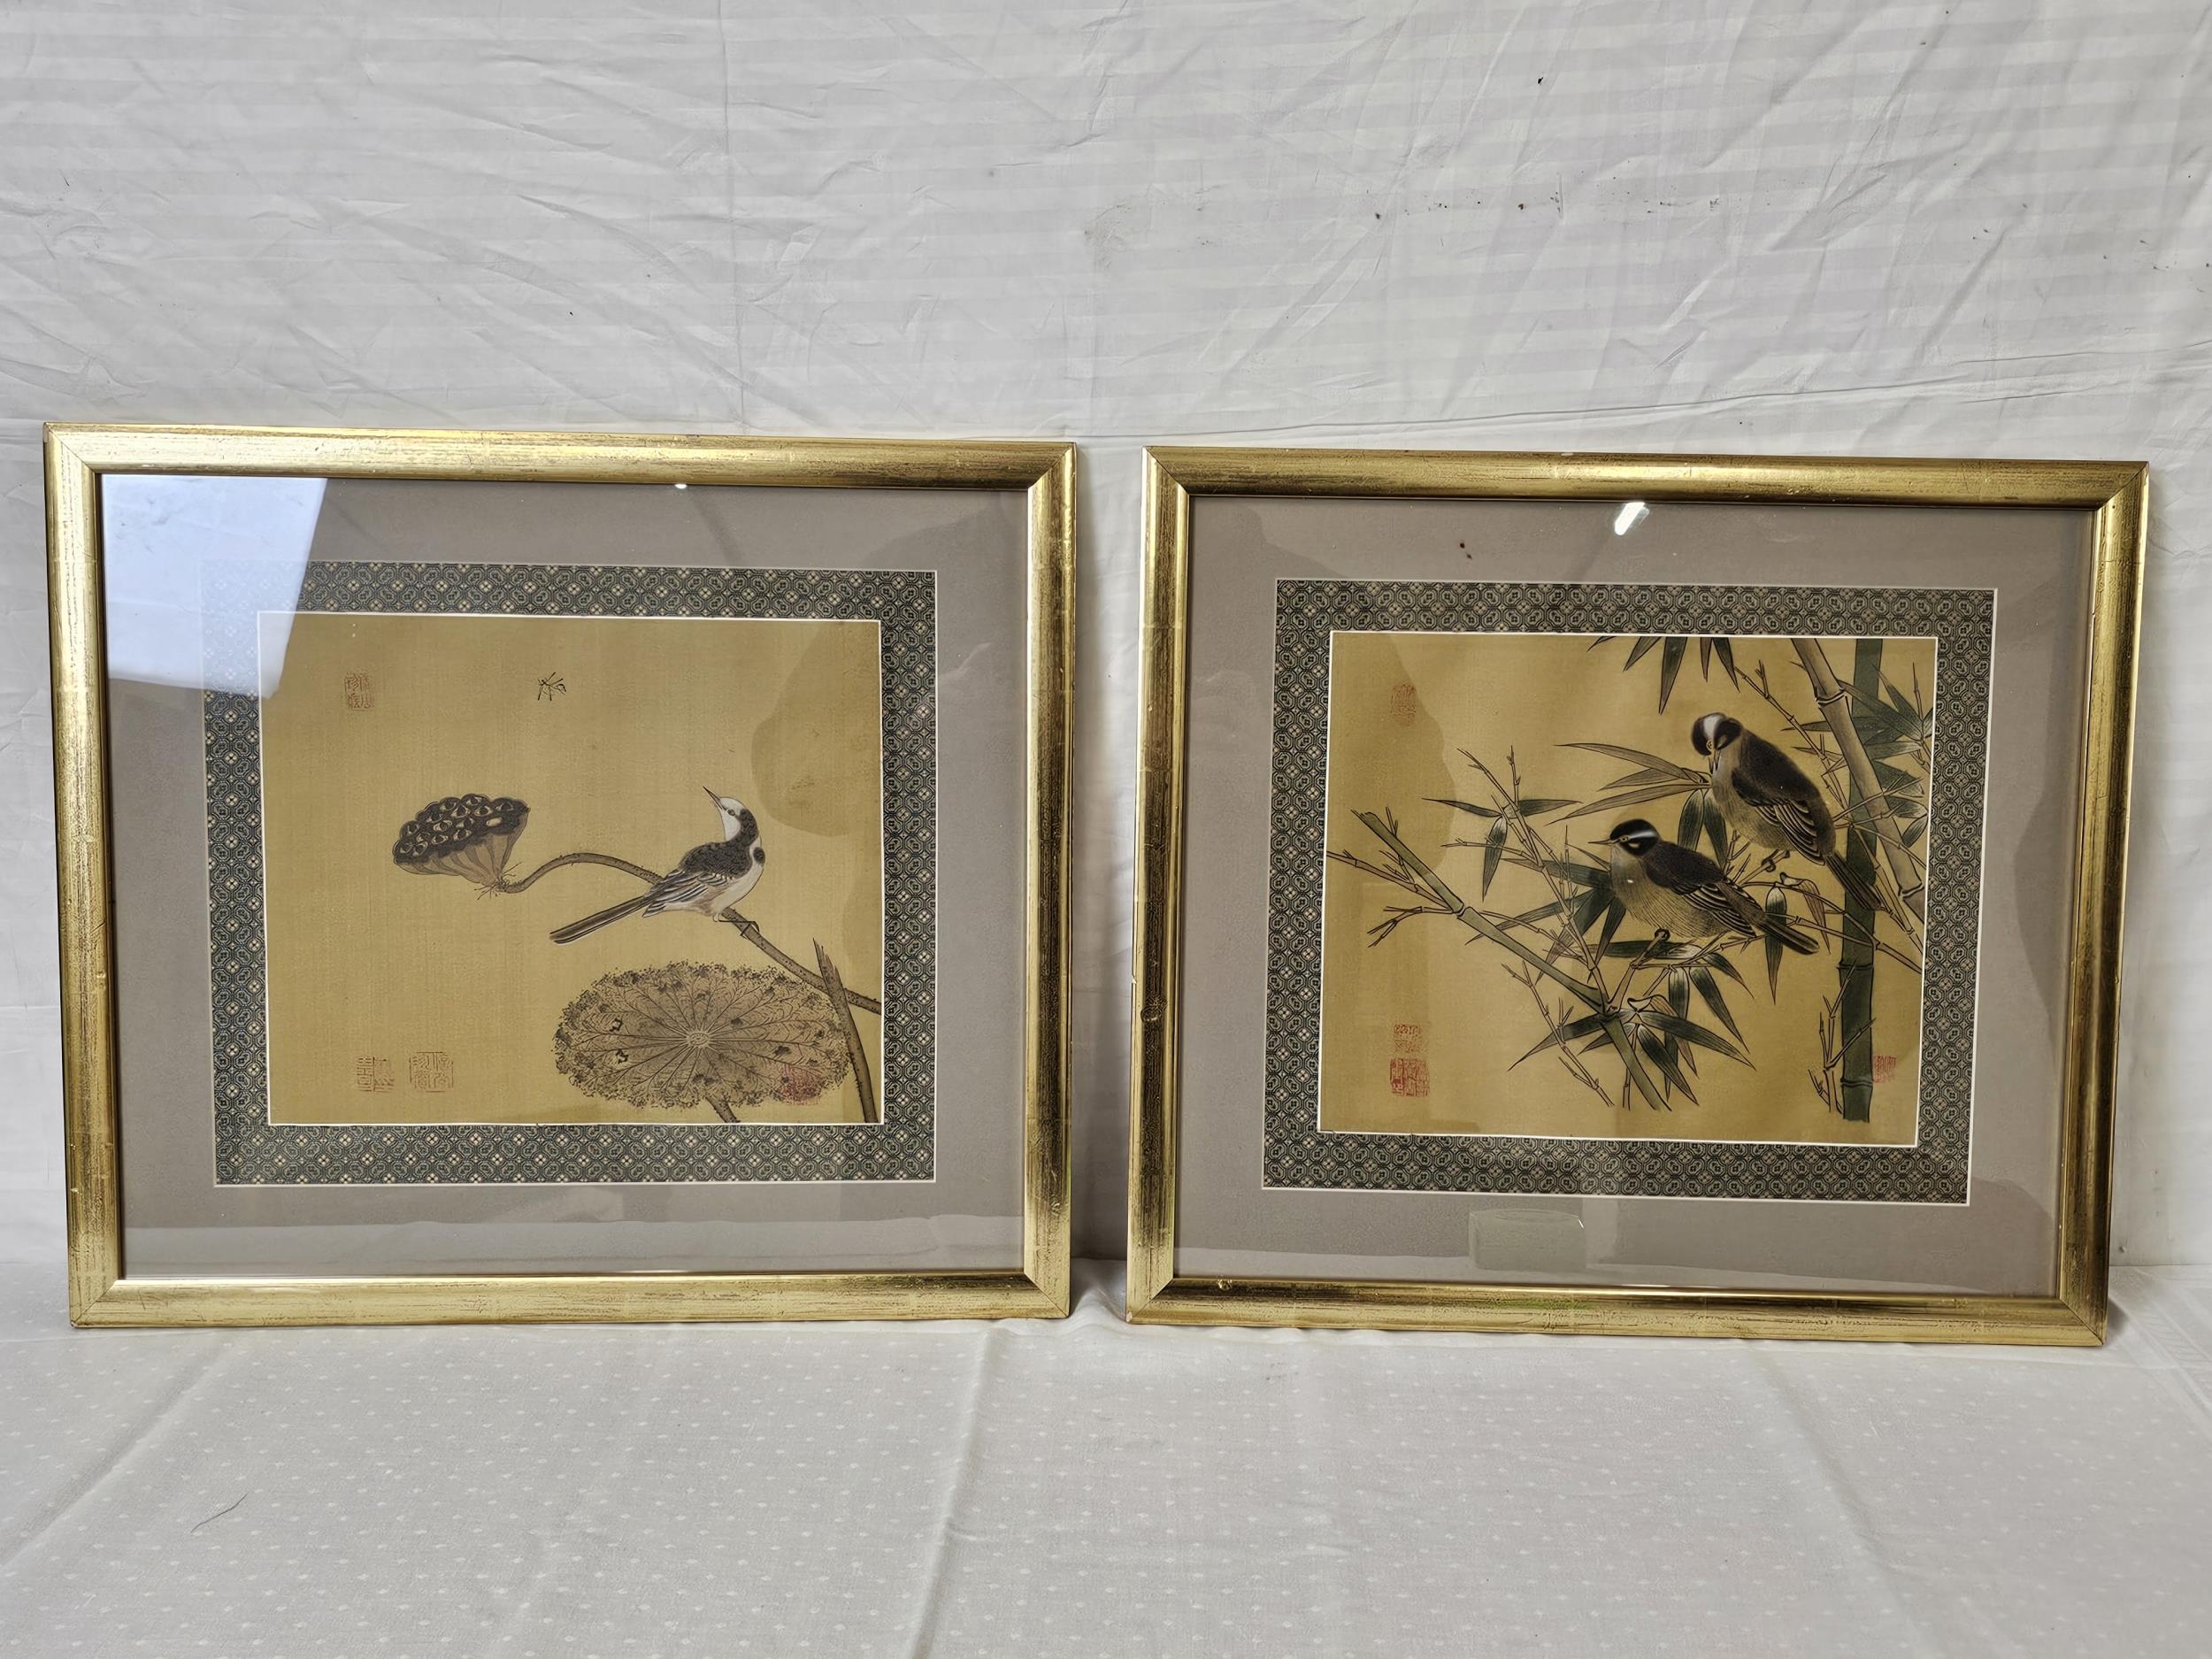 Two framed and glazed Japanese prints on silk. H.49 W.54cm.